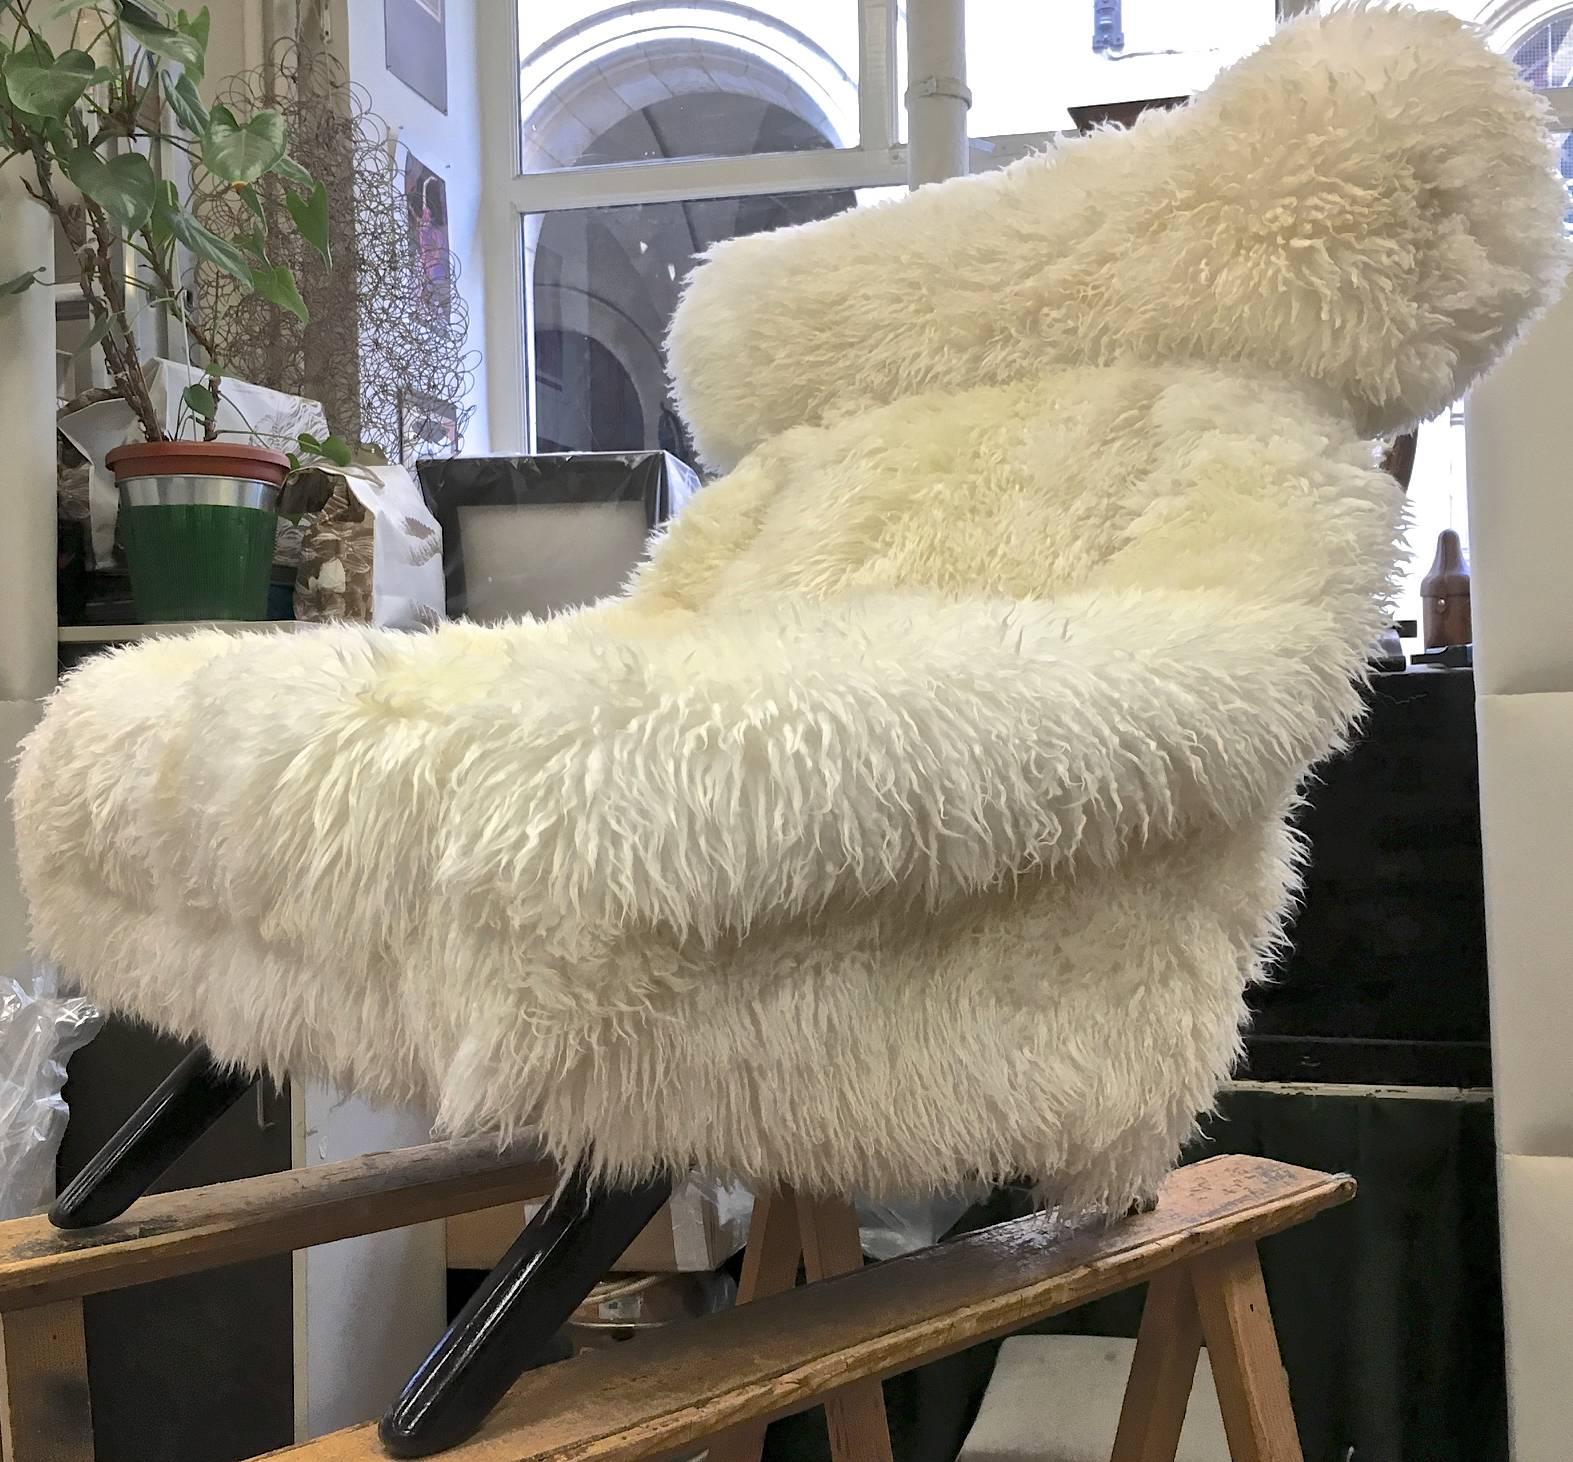 Illum Wikkelso spectacular hammer lounge chair covered in natural sheepskin fur with great comfort.